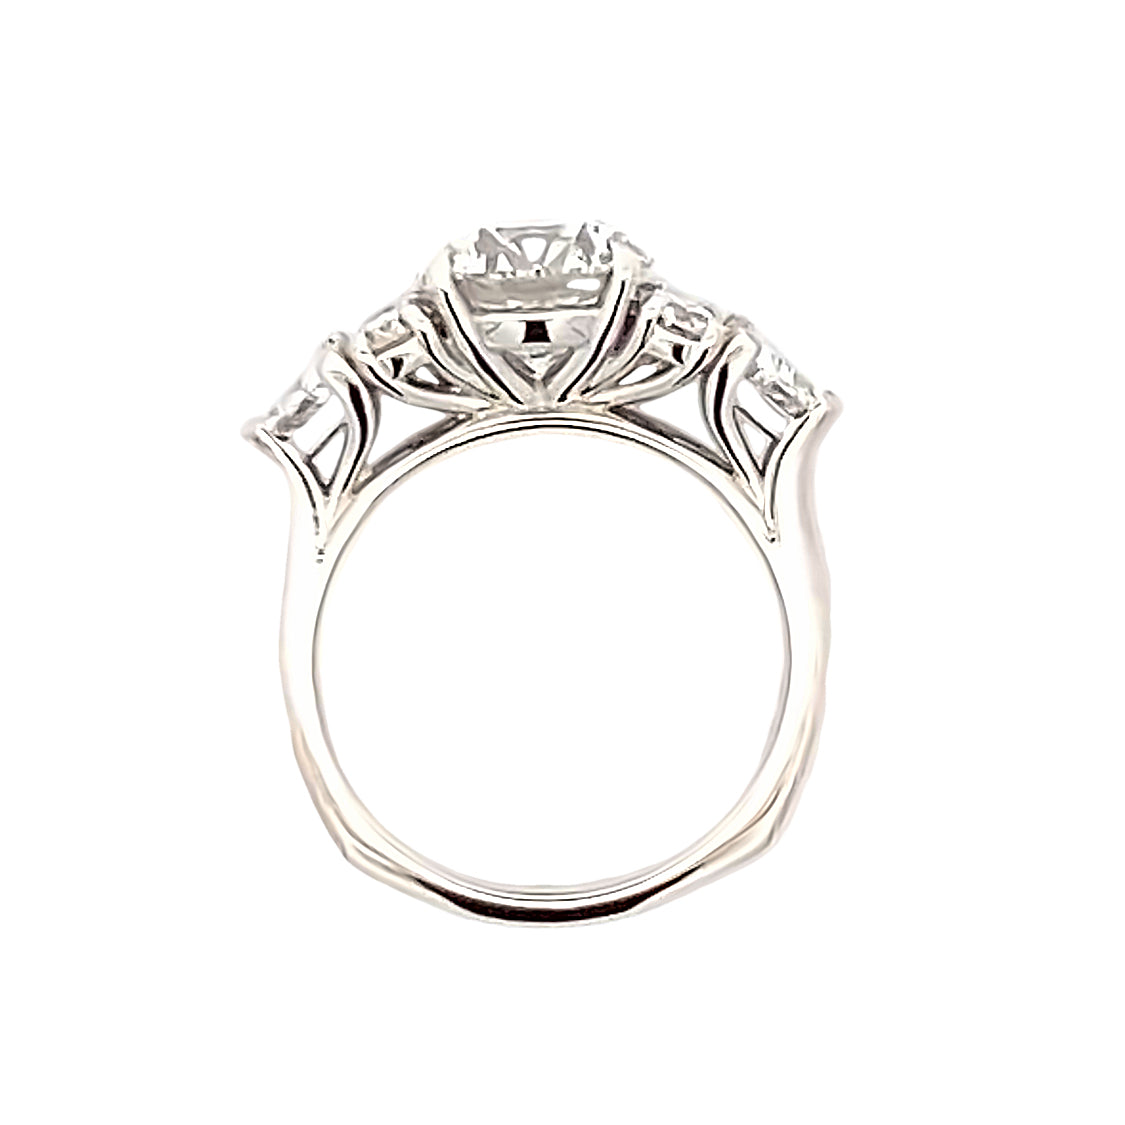 Beeghly & Co. Platinum 3.50 CTW Diamond Engagement Ring